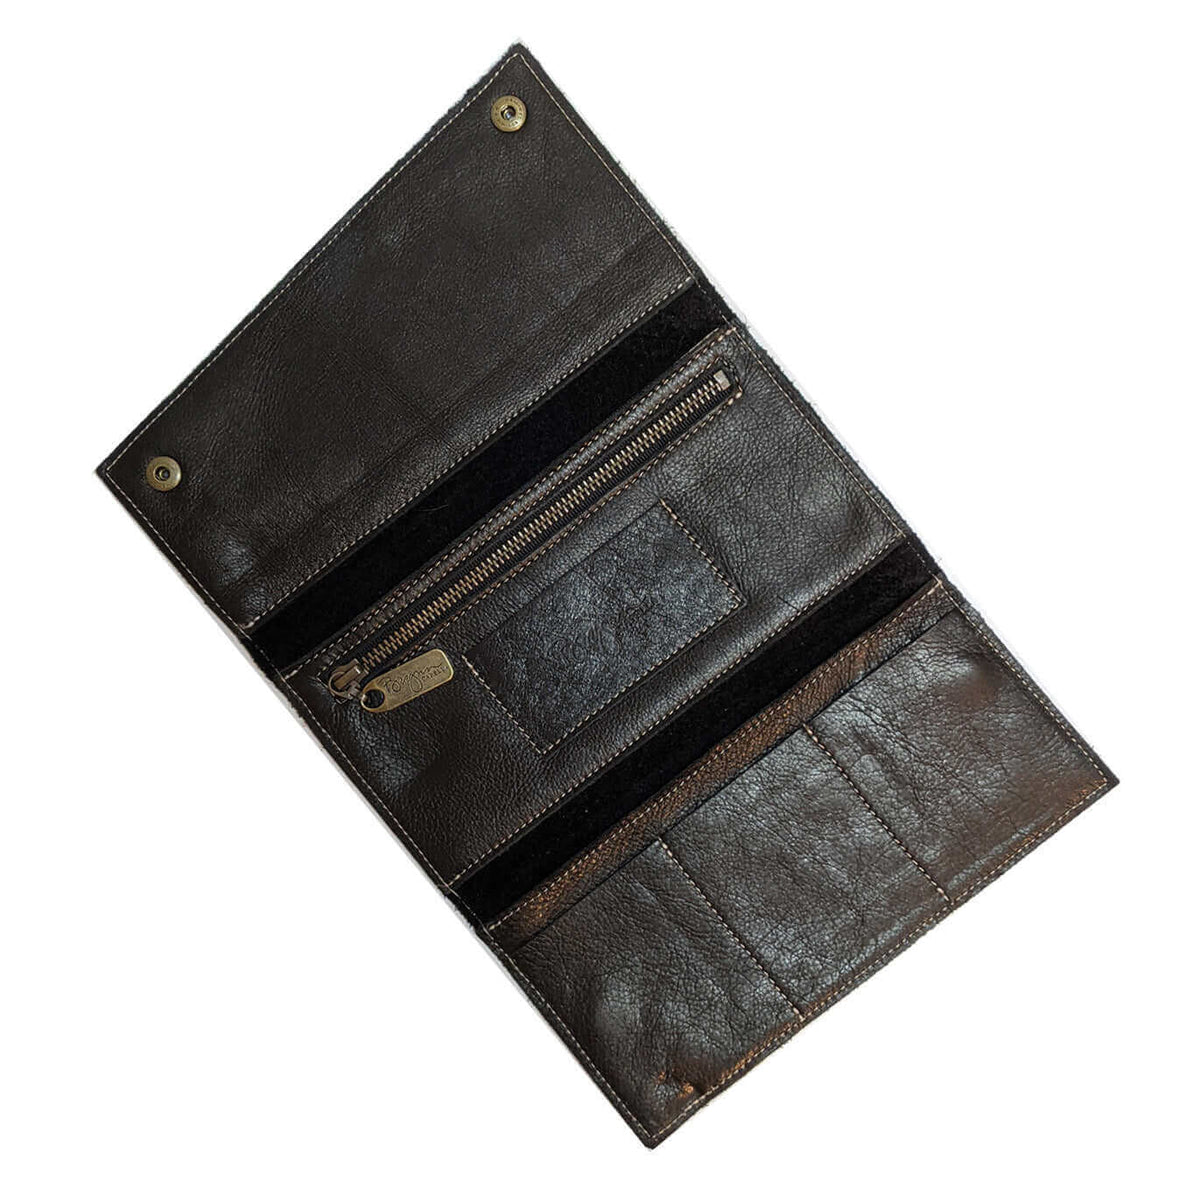 Leather Tri-fold wallet, black, Brynn Capella, made in USA leather goods